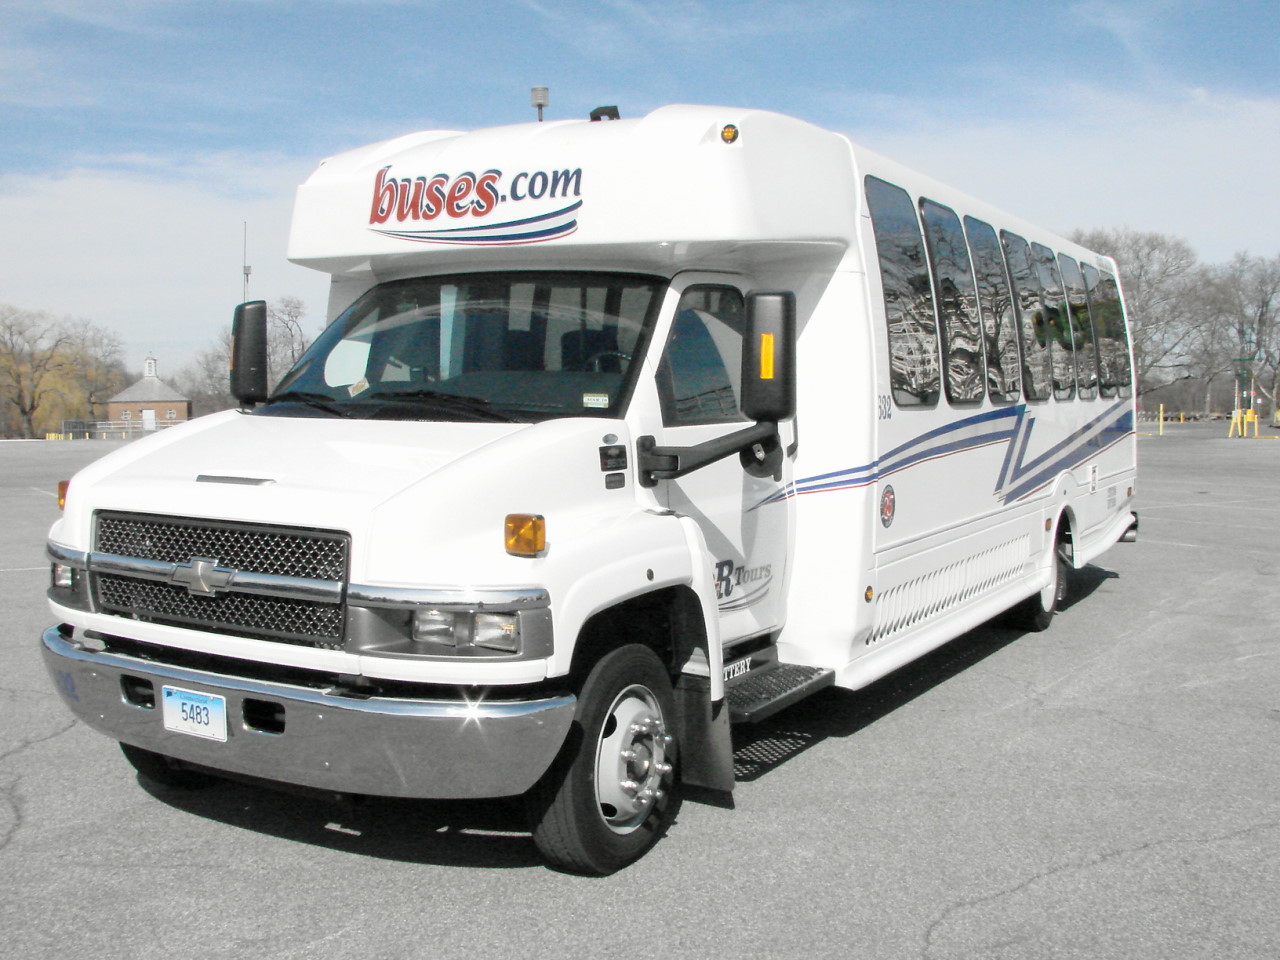 Front view of a charter bus